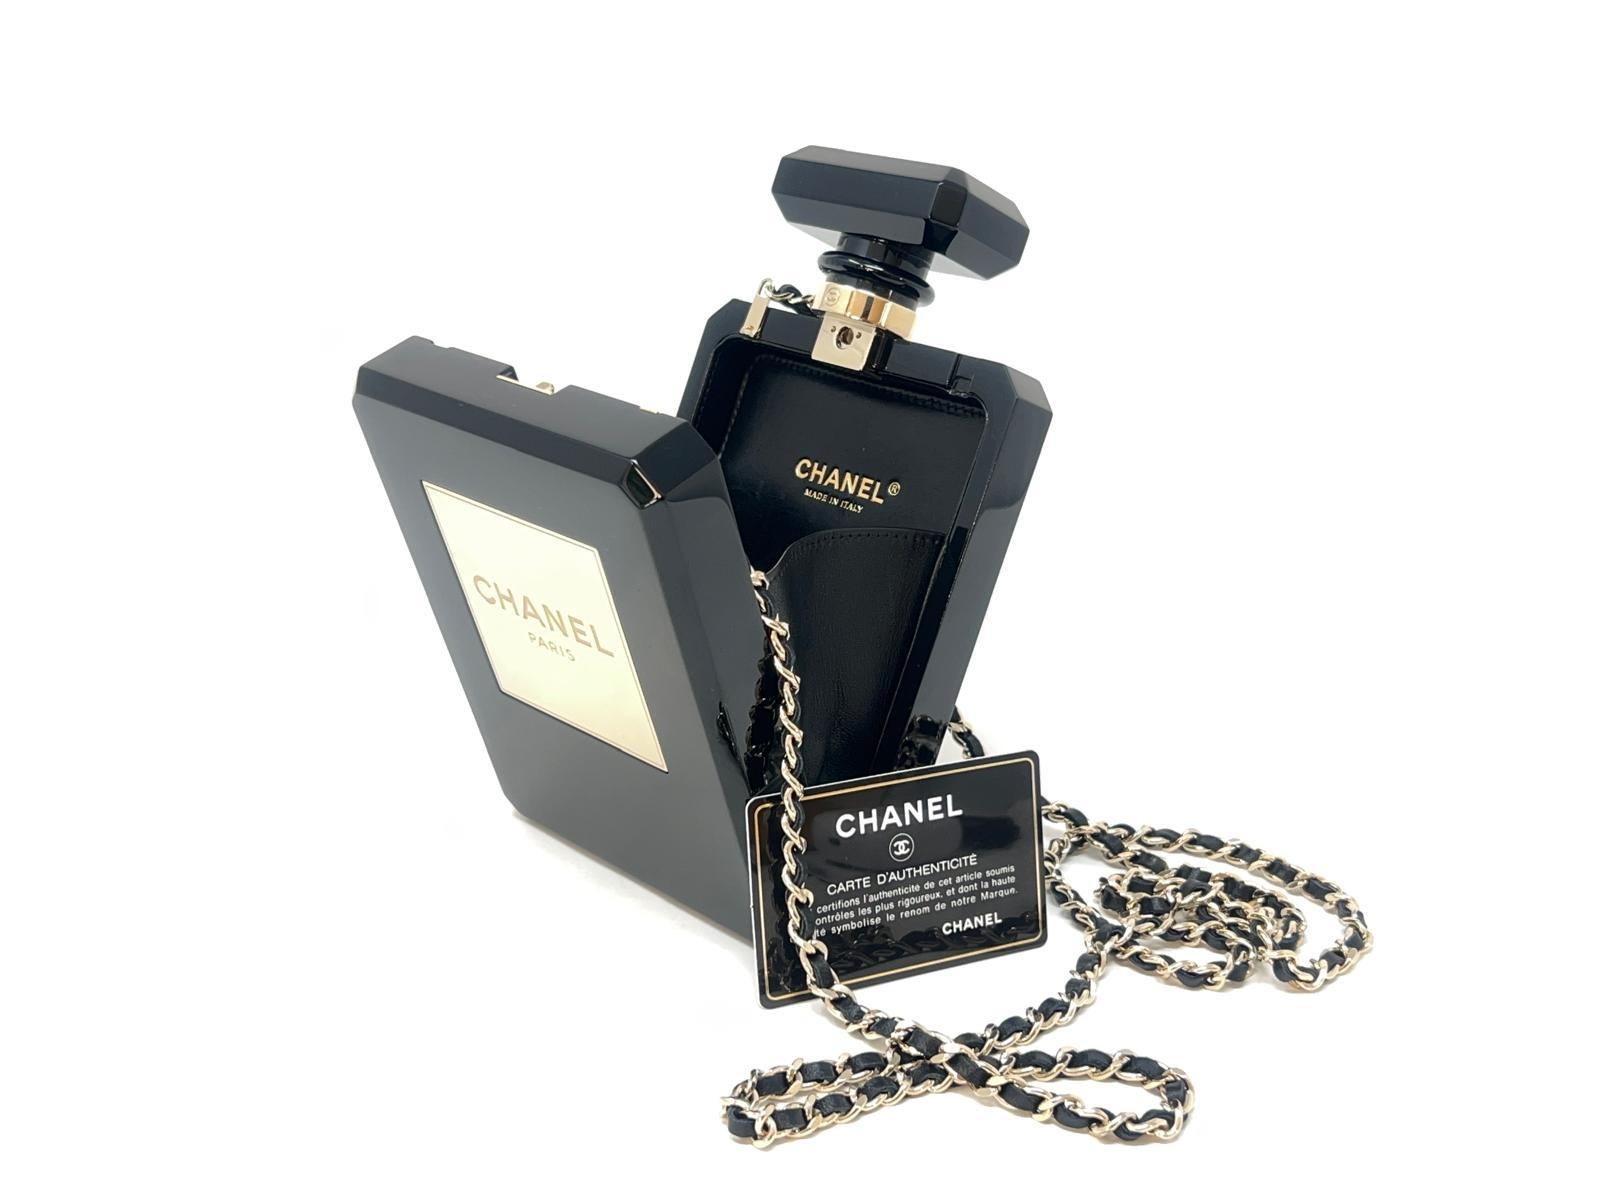 Chanel N5 Black Perfume Bottle Minaudière Cruise Collection 2013  For Sale 6